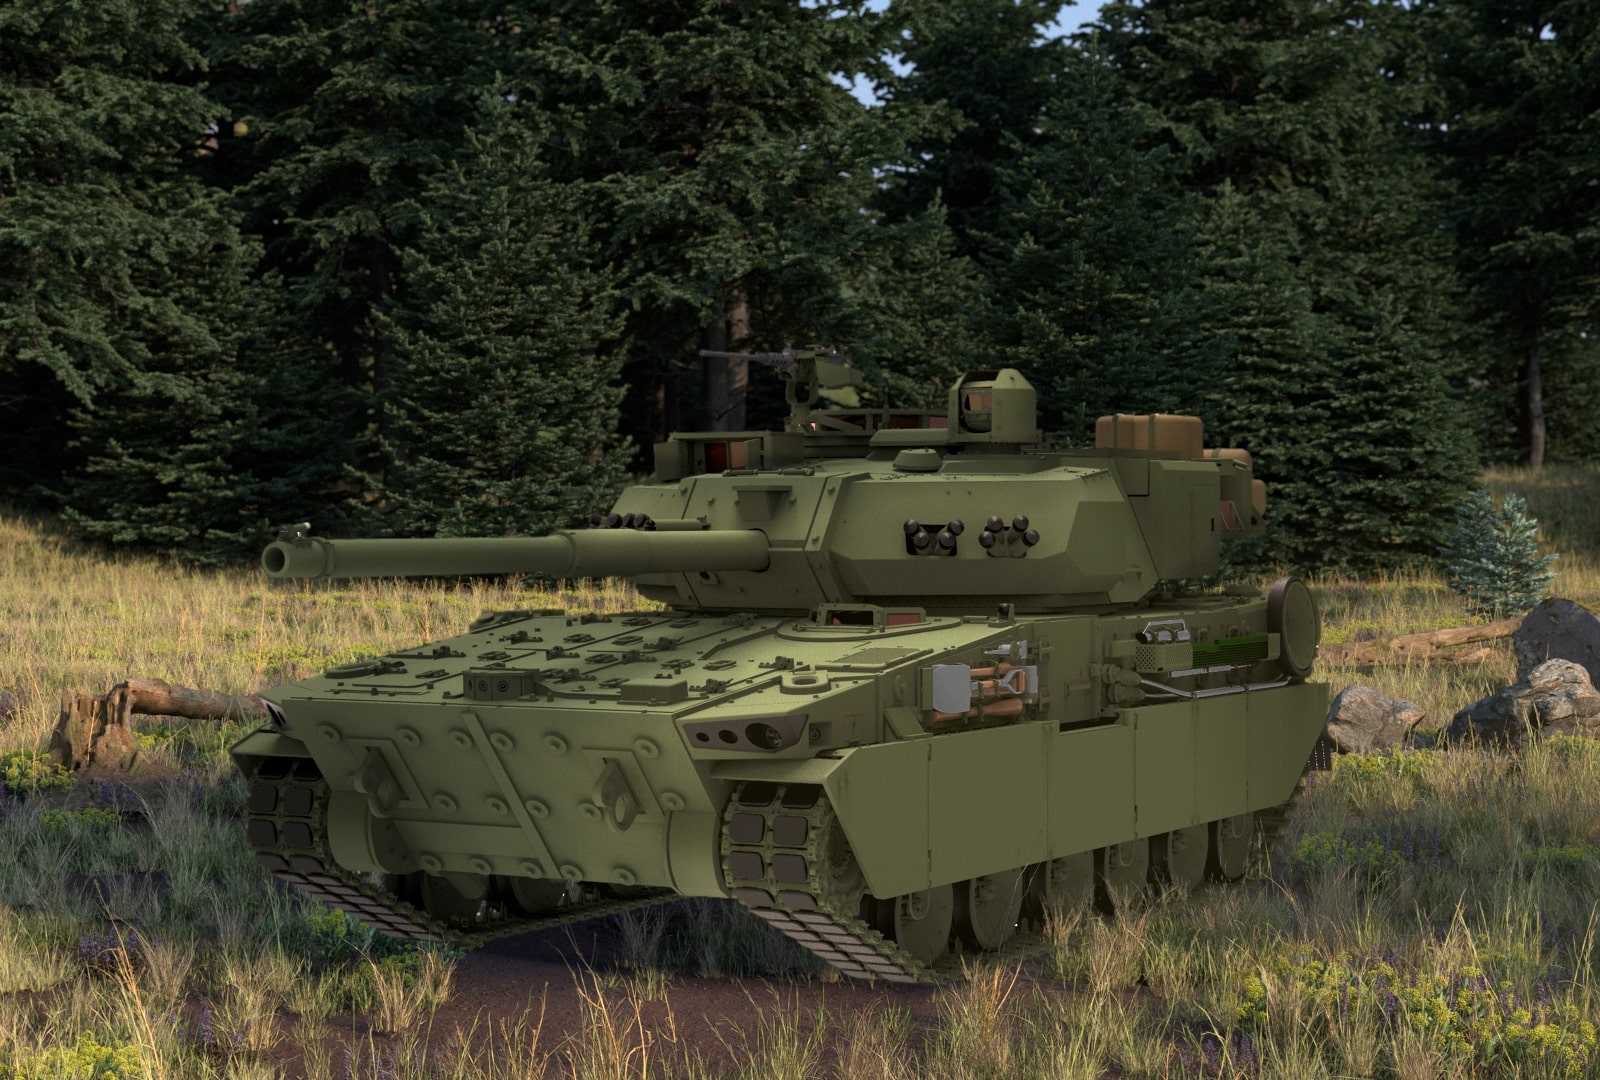 Wissen nachtmerrie luchthaven The US Army's new light tank faces a daunting task - Sandboxx